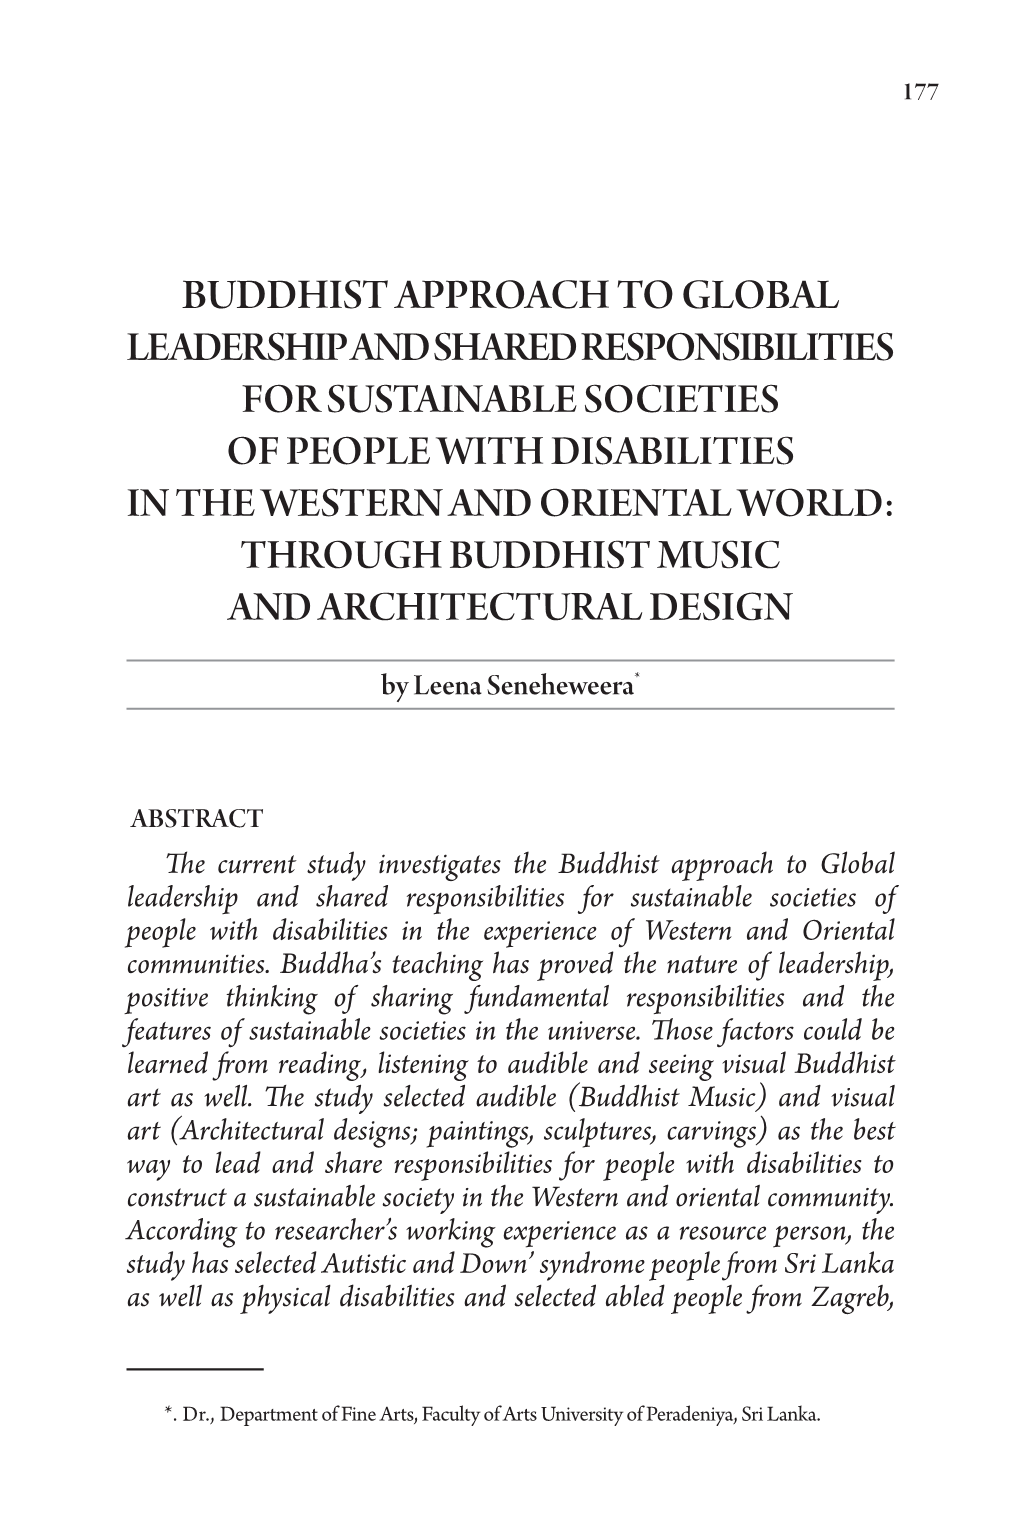 Buddhist Approach to Global Leadership and Shared